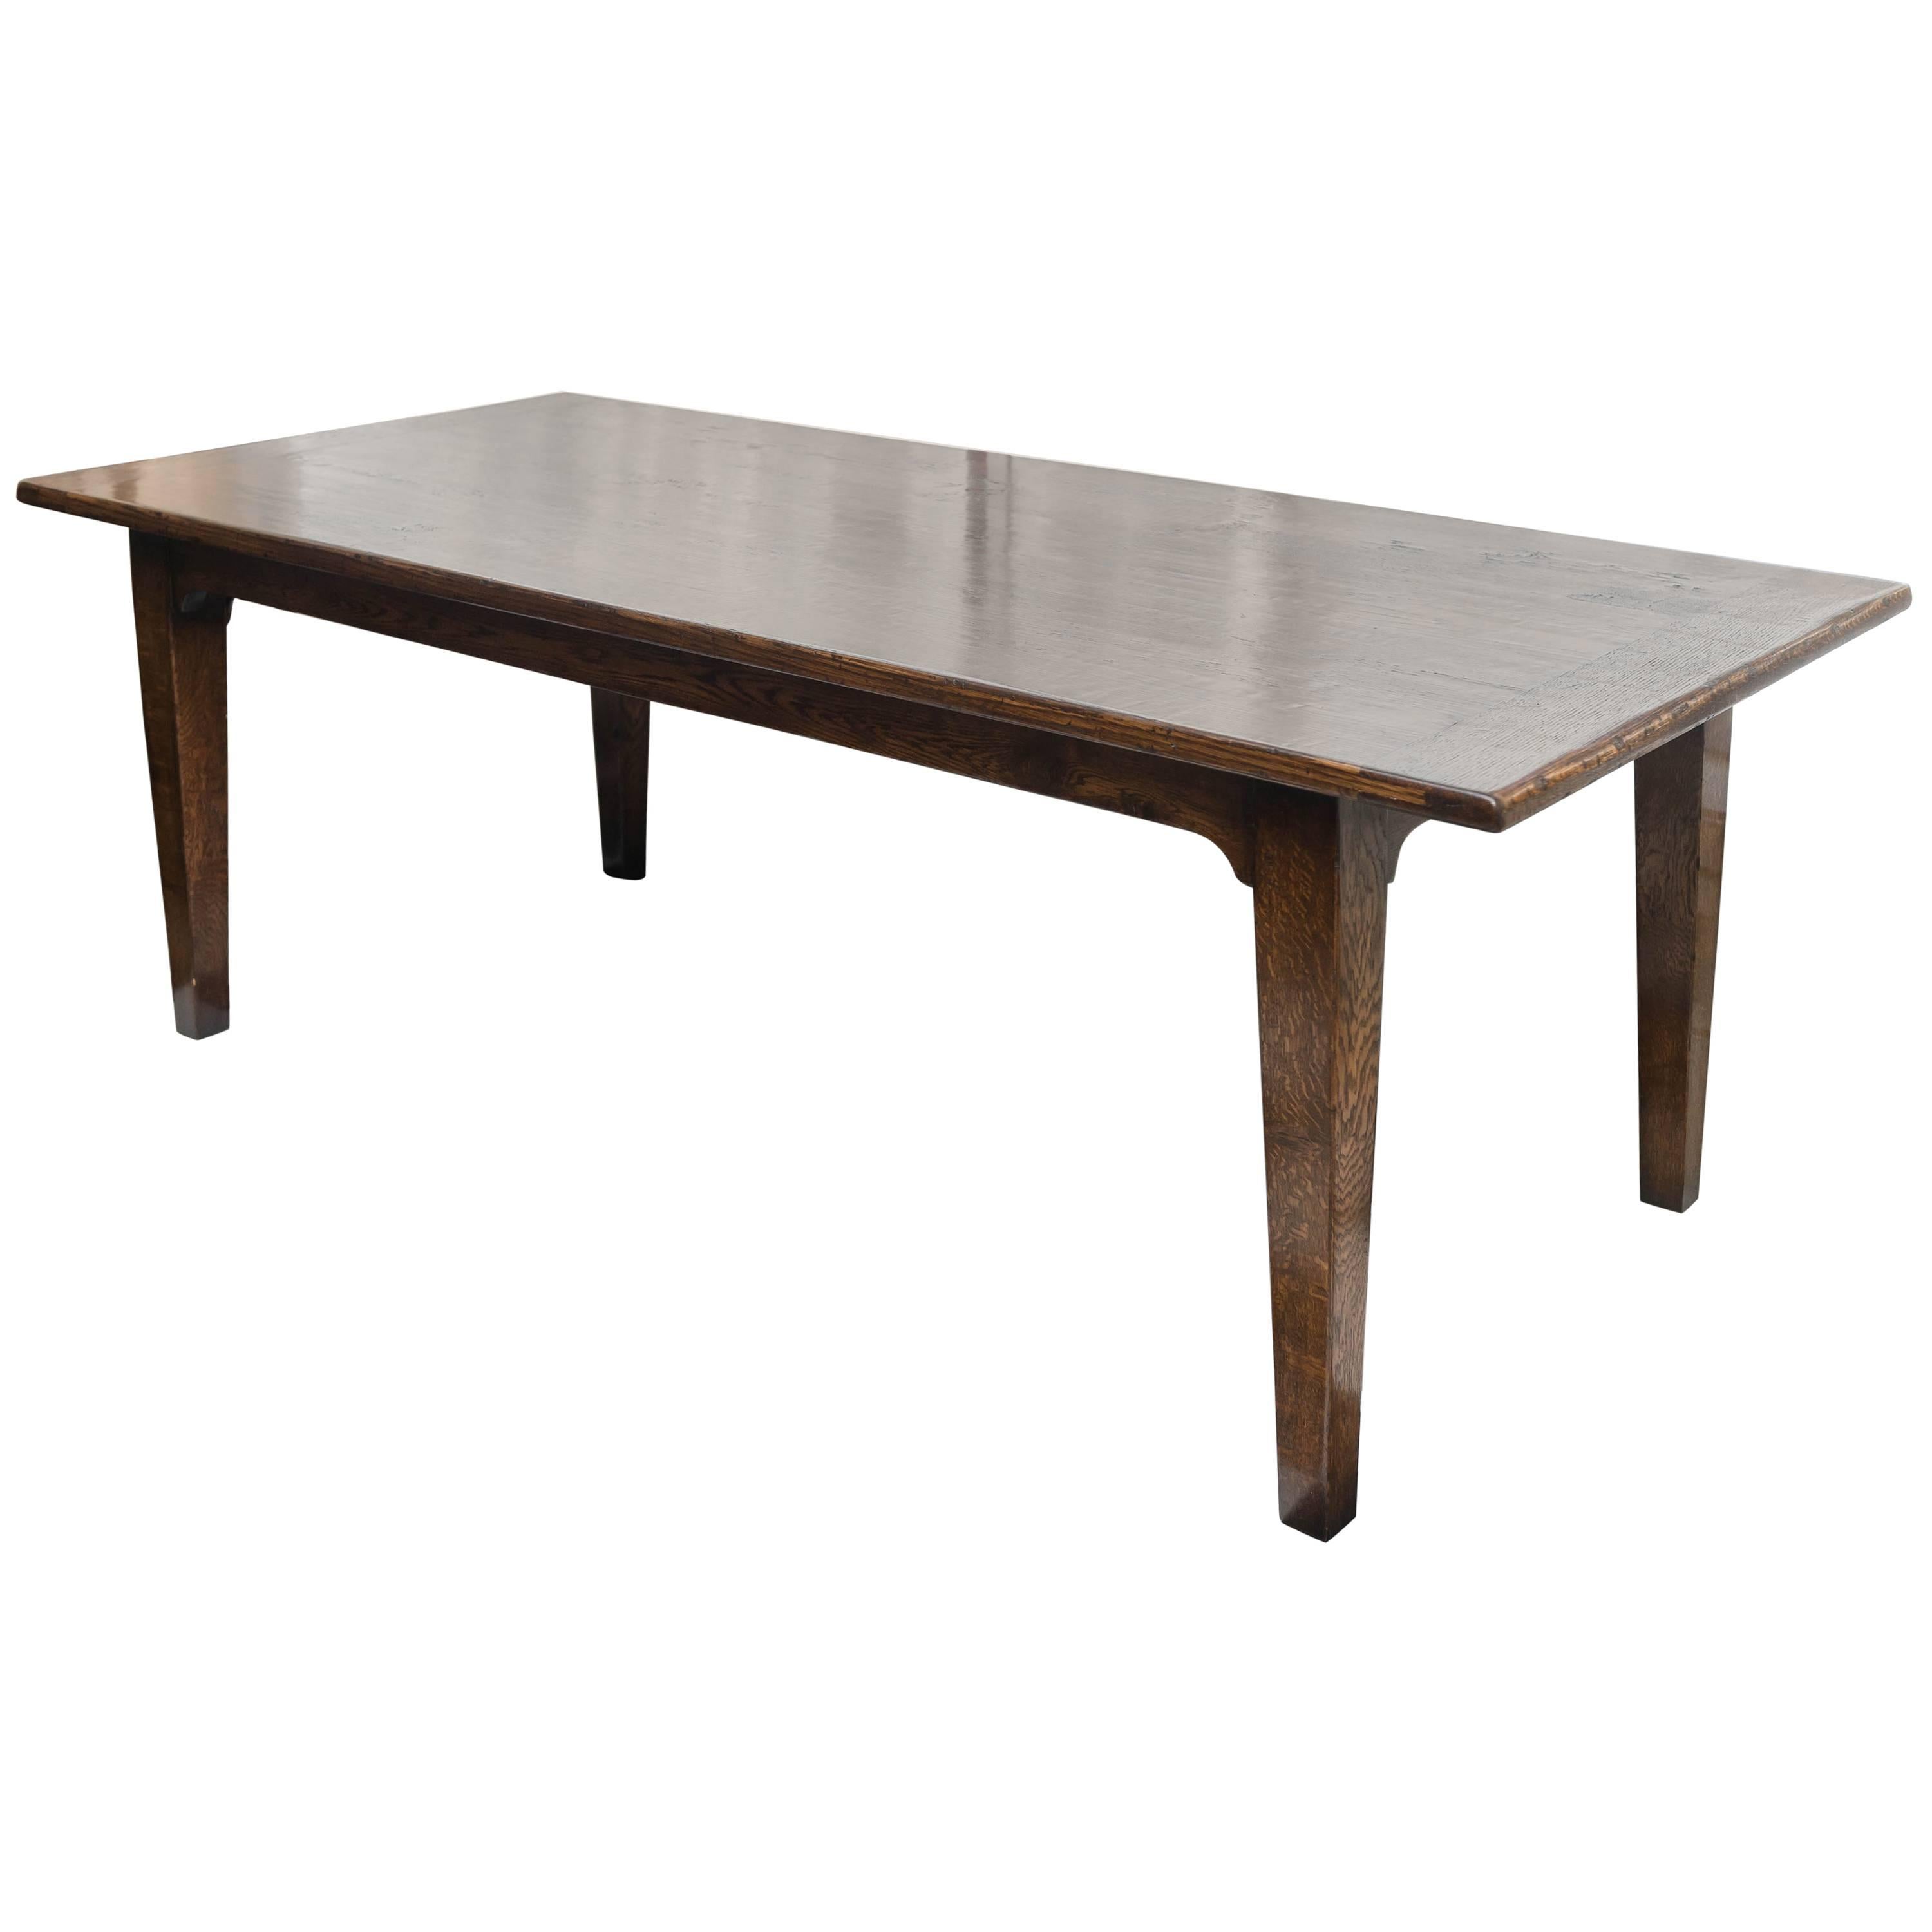 Classic Form Solid Oak Dining Table, Pegged Construction, 20th Century